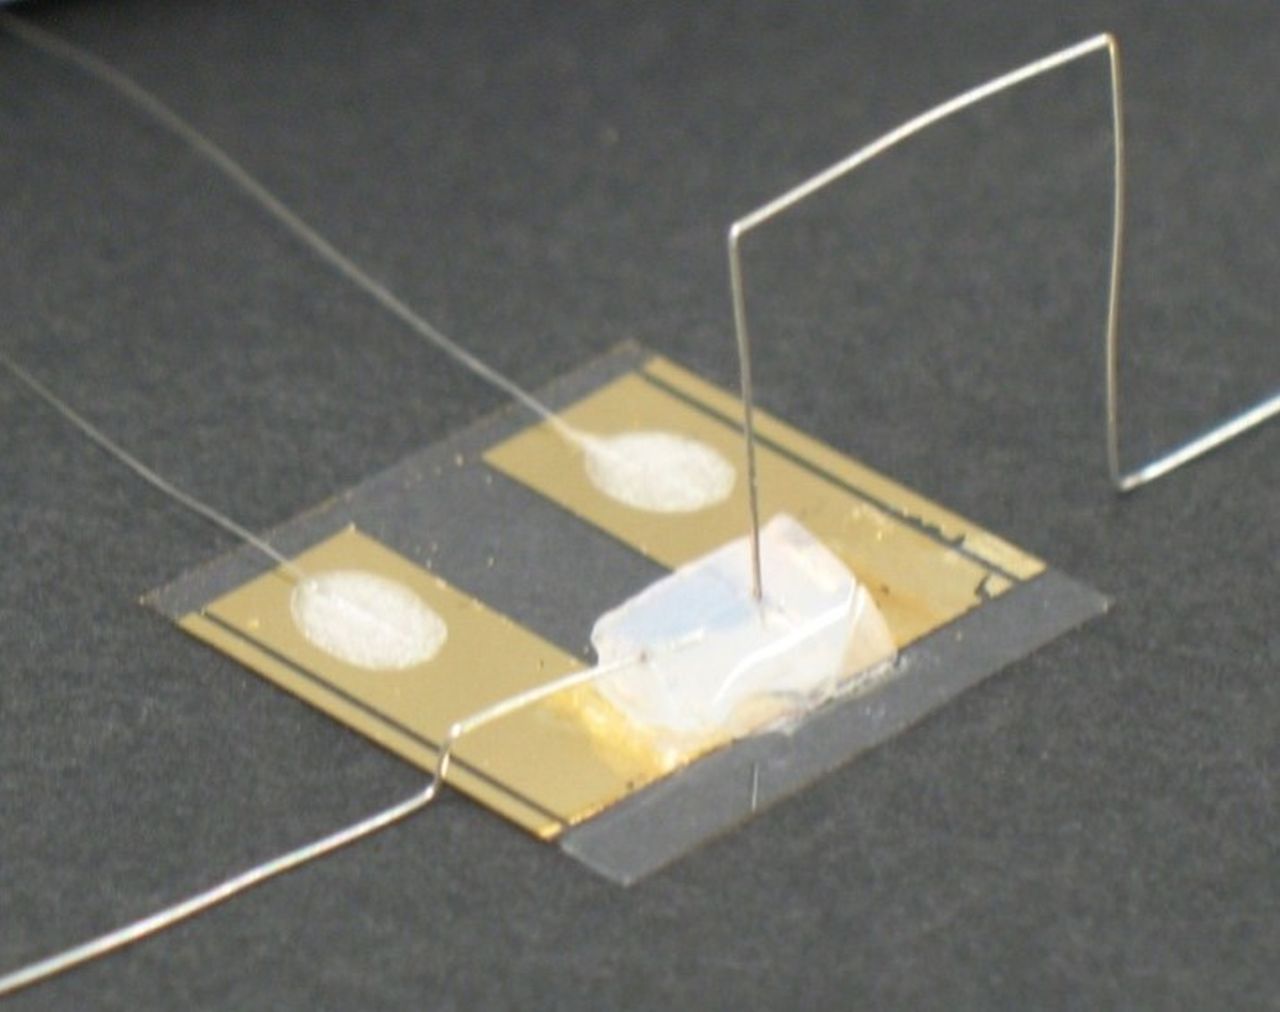 Setup of the single-atom transistor first developed in Karlsruhe by Thomas Schimmel and his team in 2004. (Photo: KIT/Schimmel)